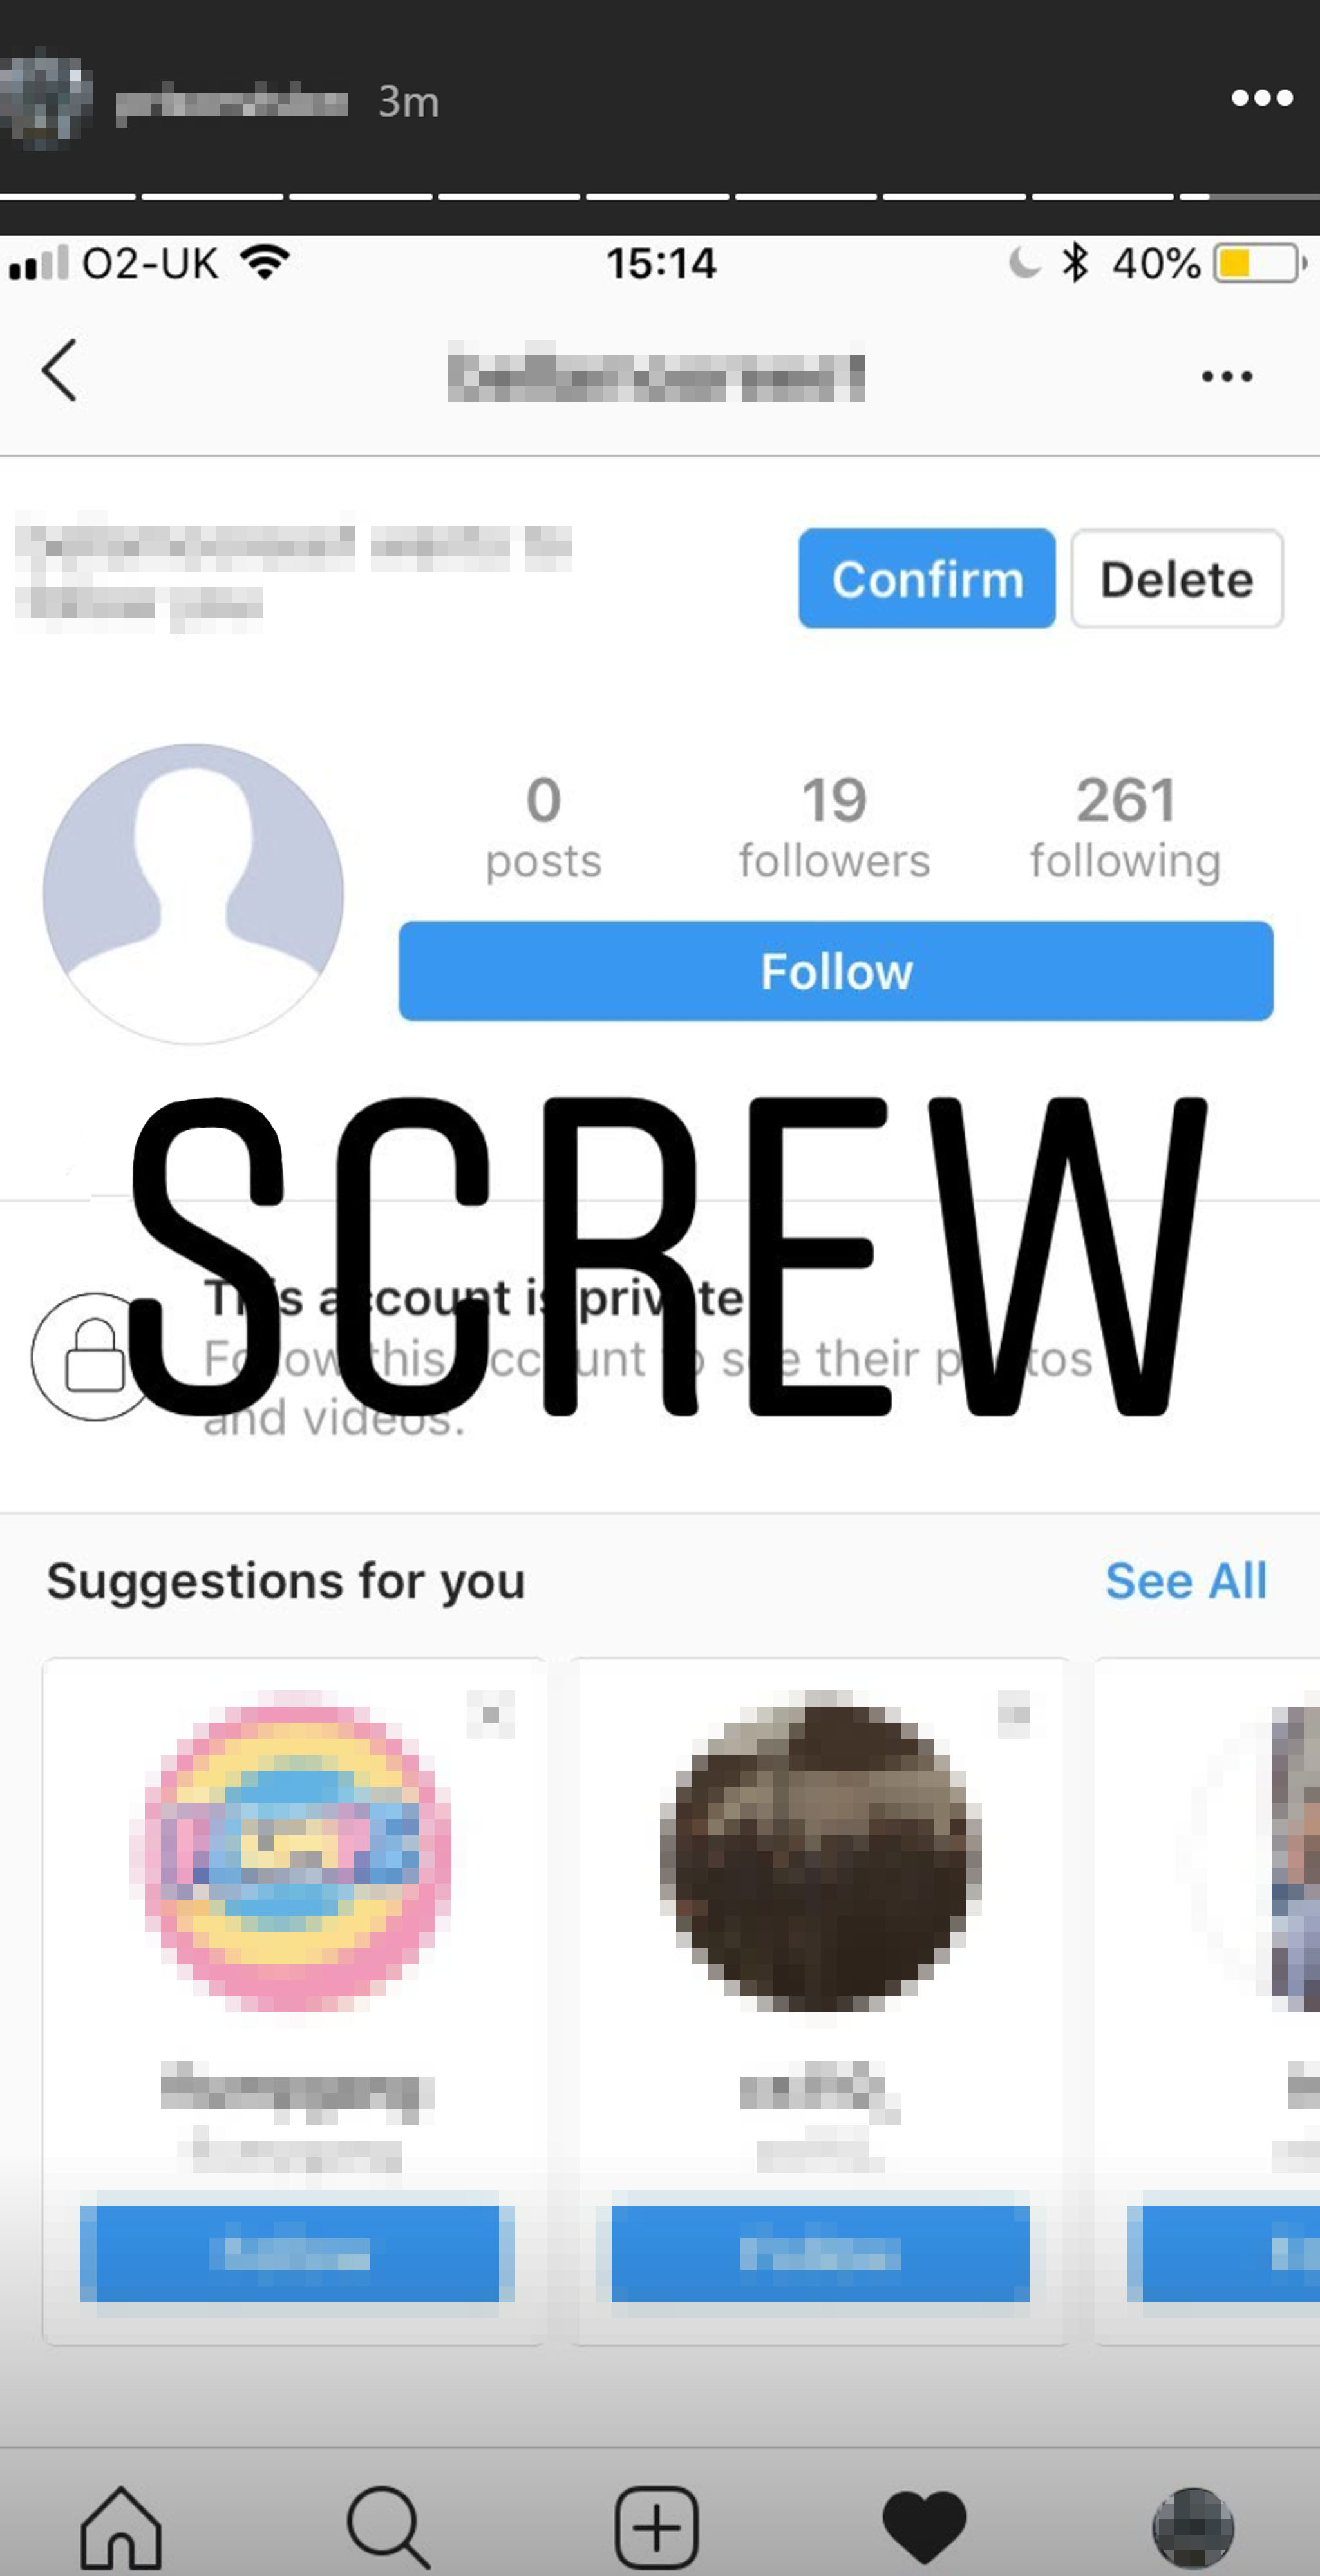 A screenshot from an Instagram Story shows a social media account with screw written over the image